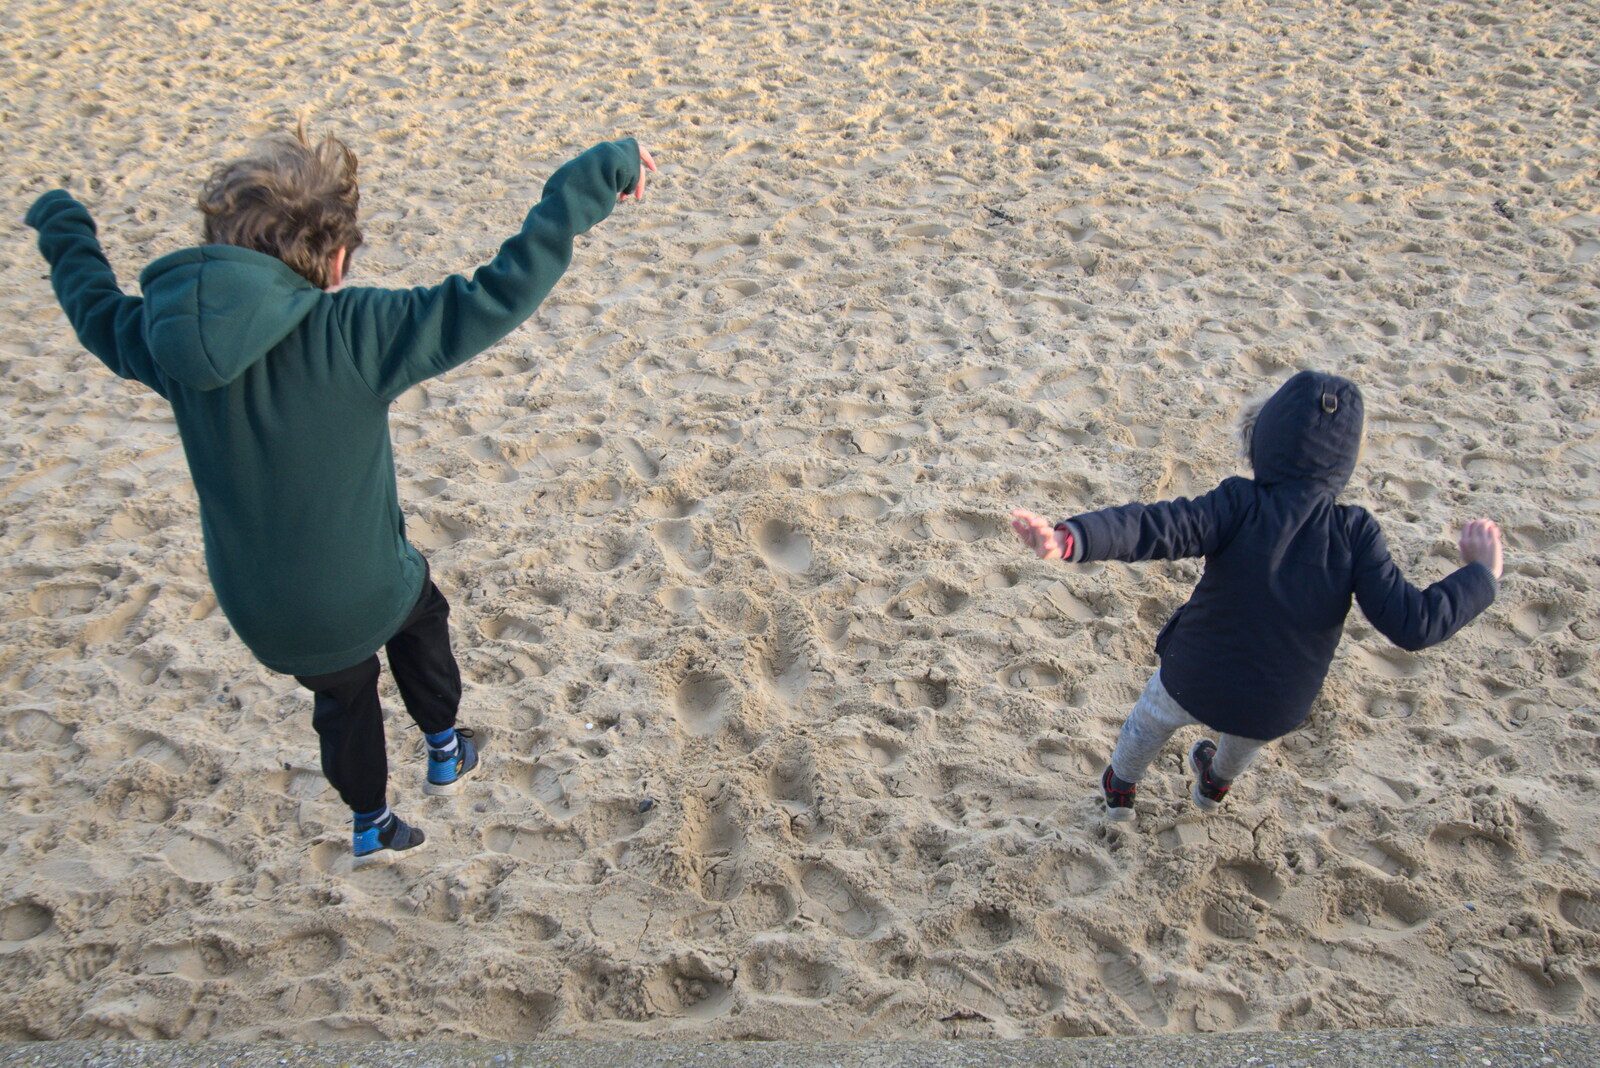 There's more leaping from the boys from A Return to the Beach, Southwold, Suffolk - 20th December 2020